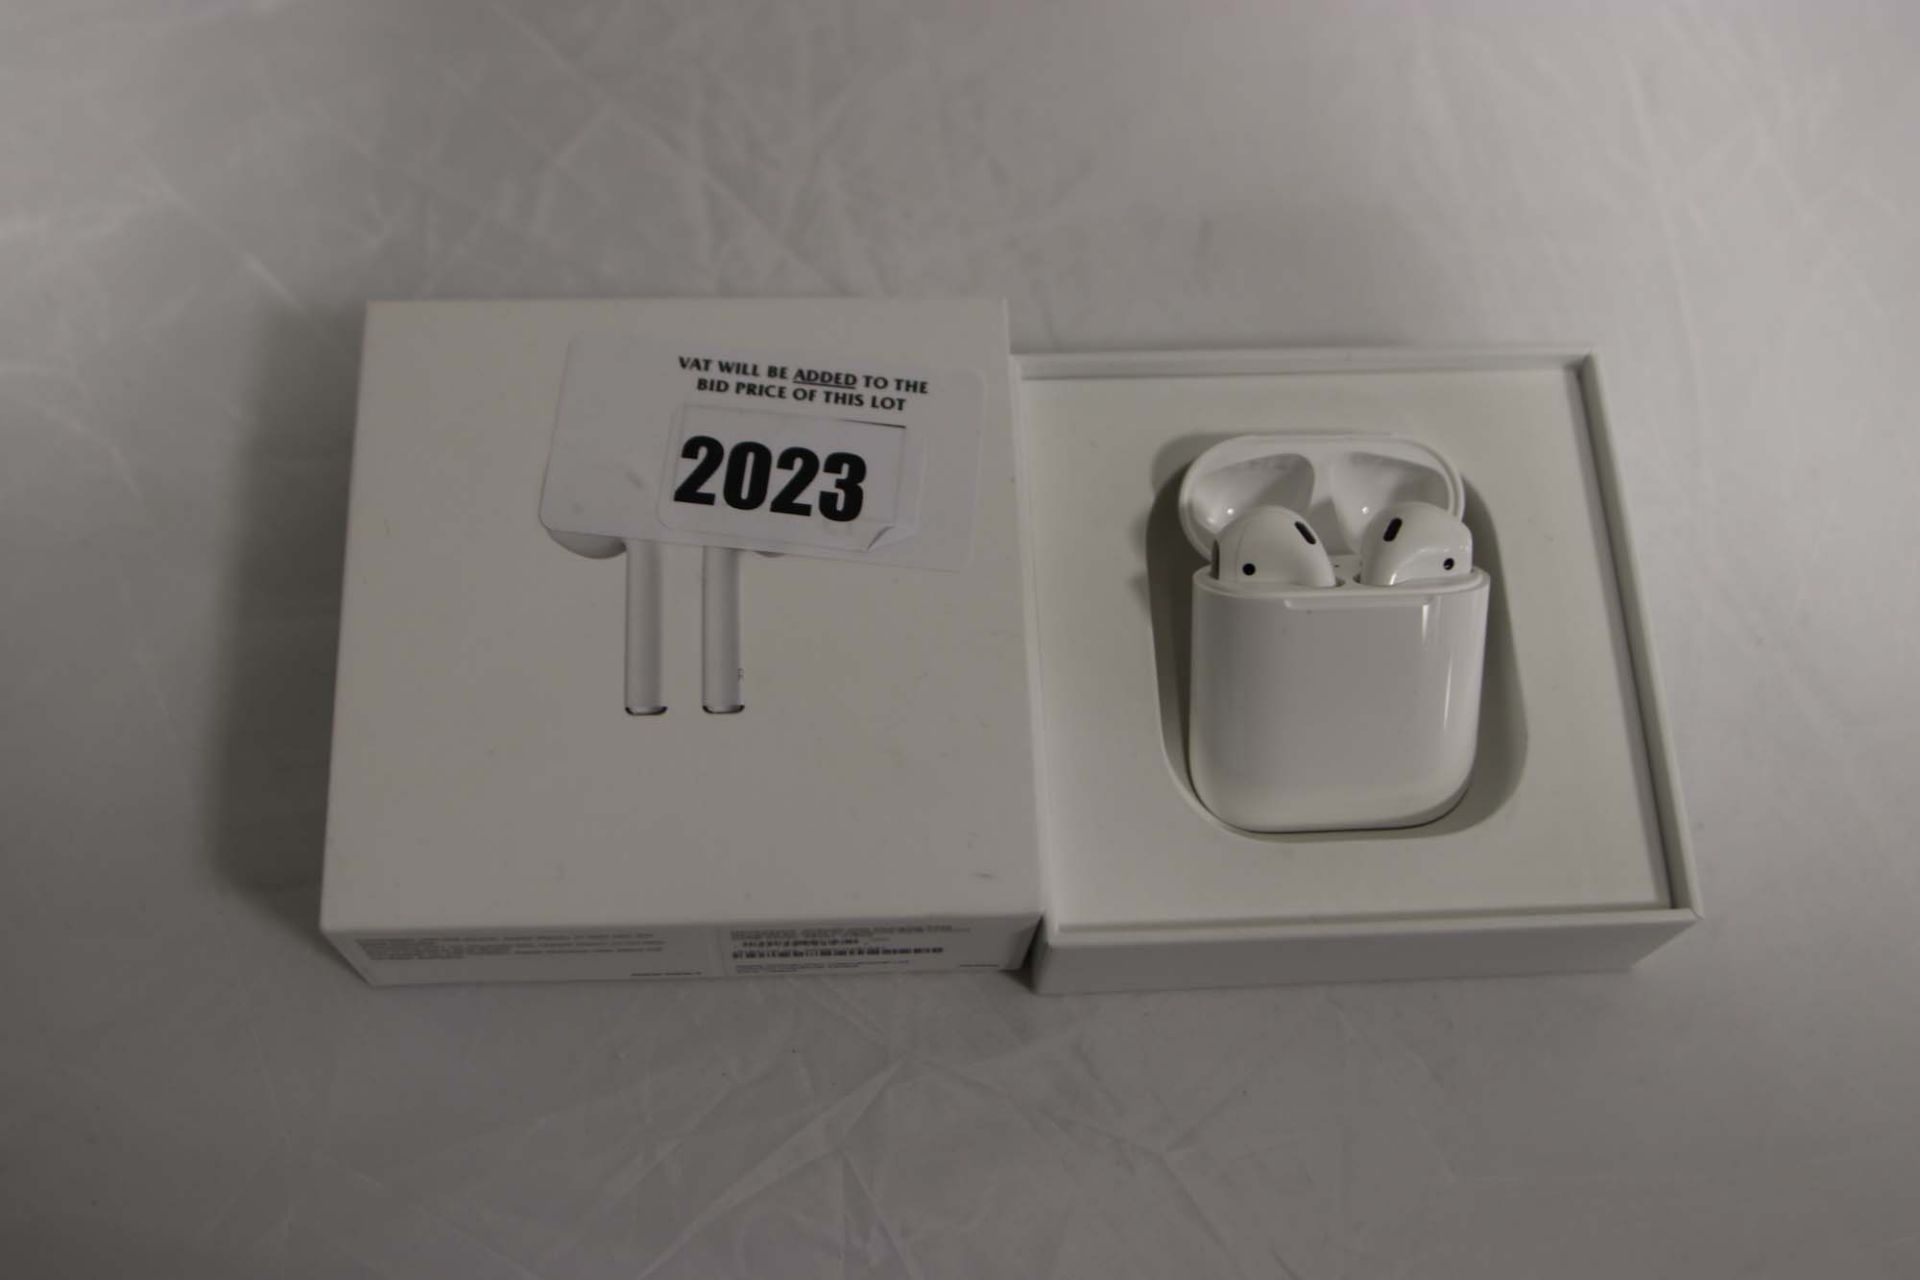 Pair of Apple AirPods in case